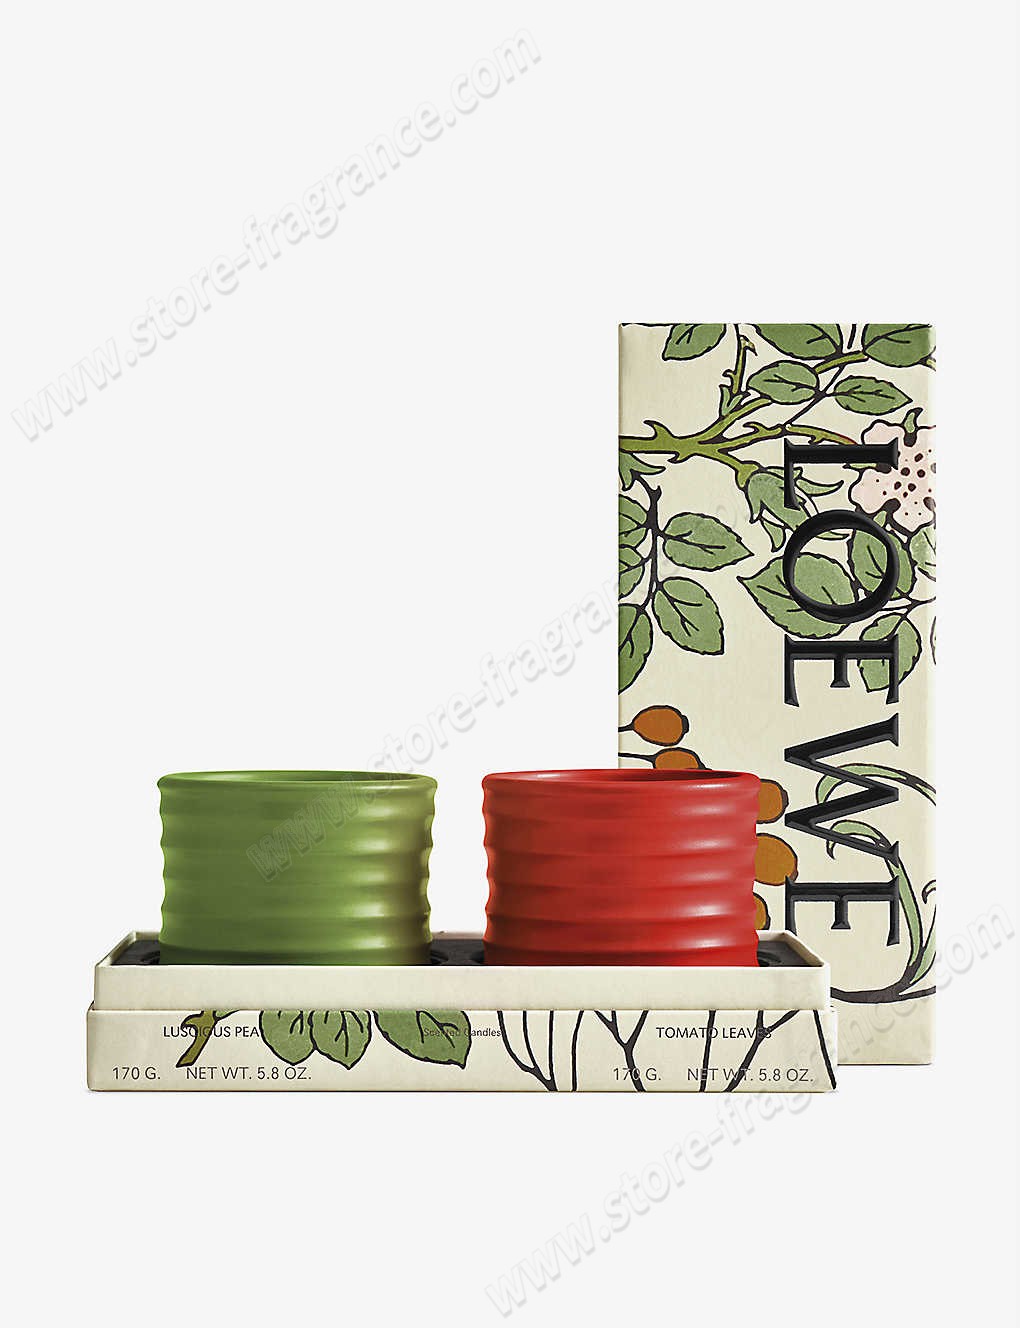 LOEWE/Luscious Pea and Tomato Leaves scented candle gift set Limit Offer - -0